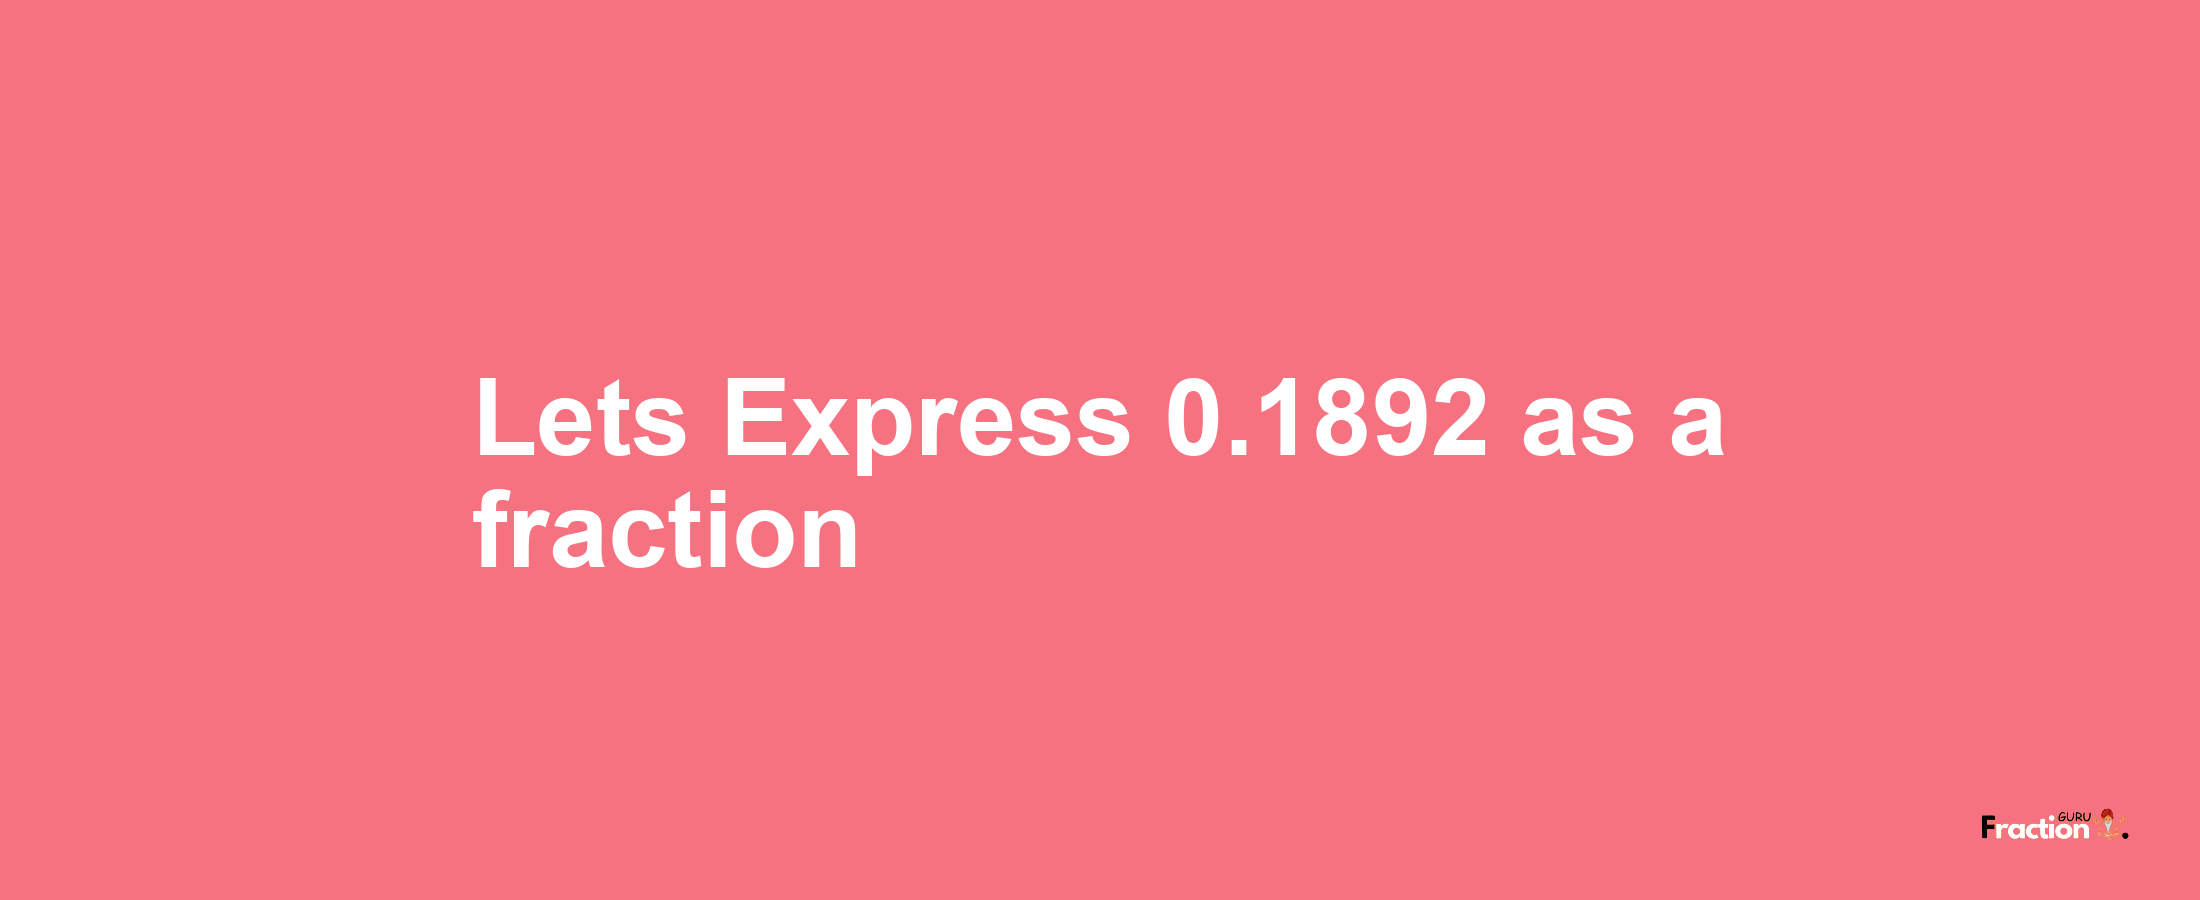 Lets Express 0.1892 as afraction